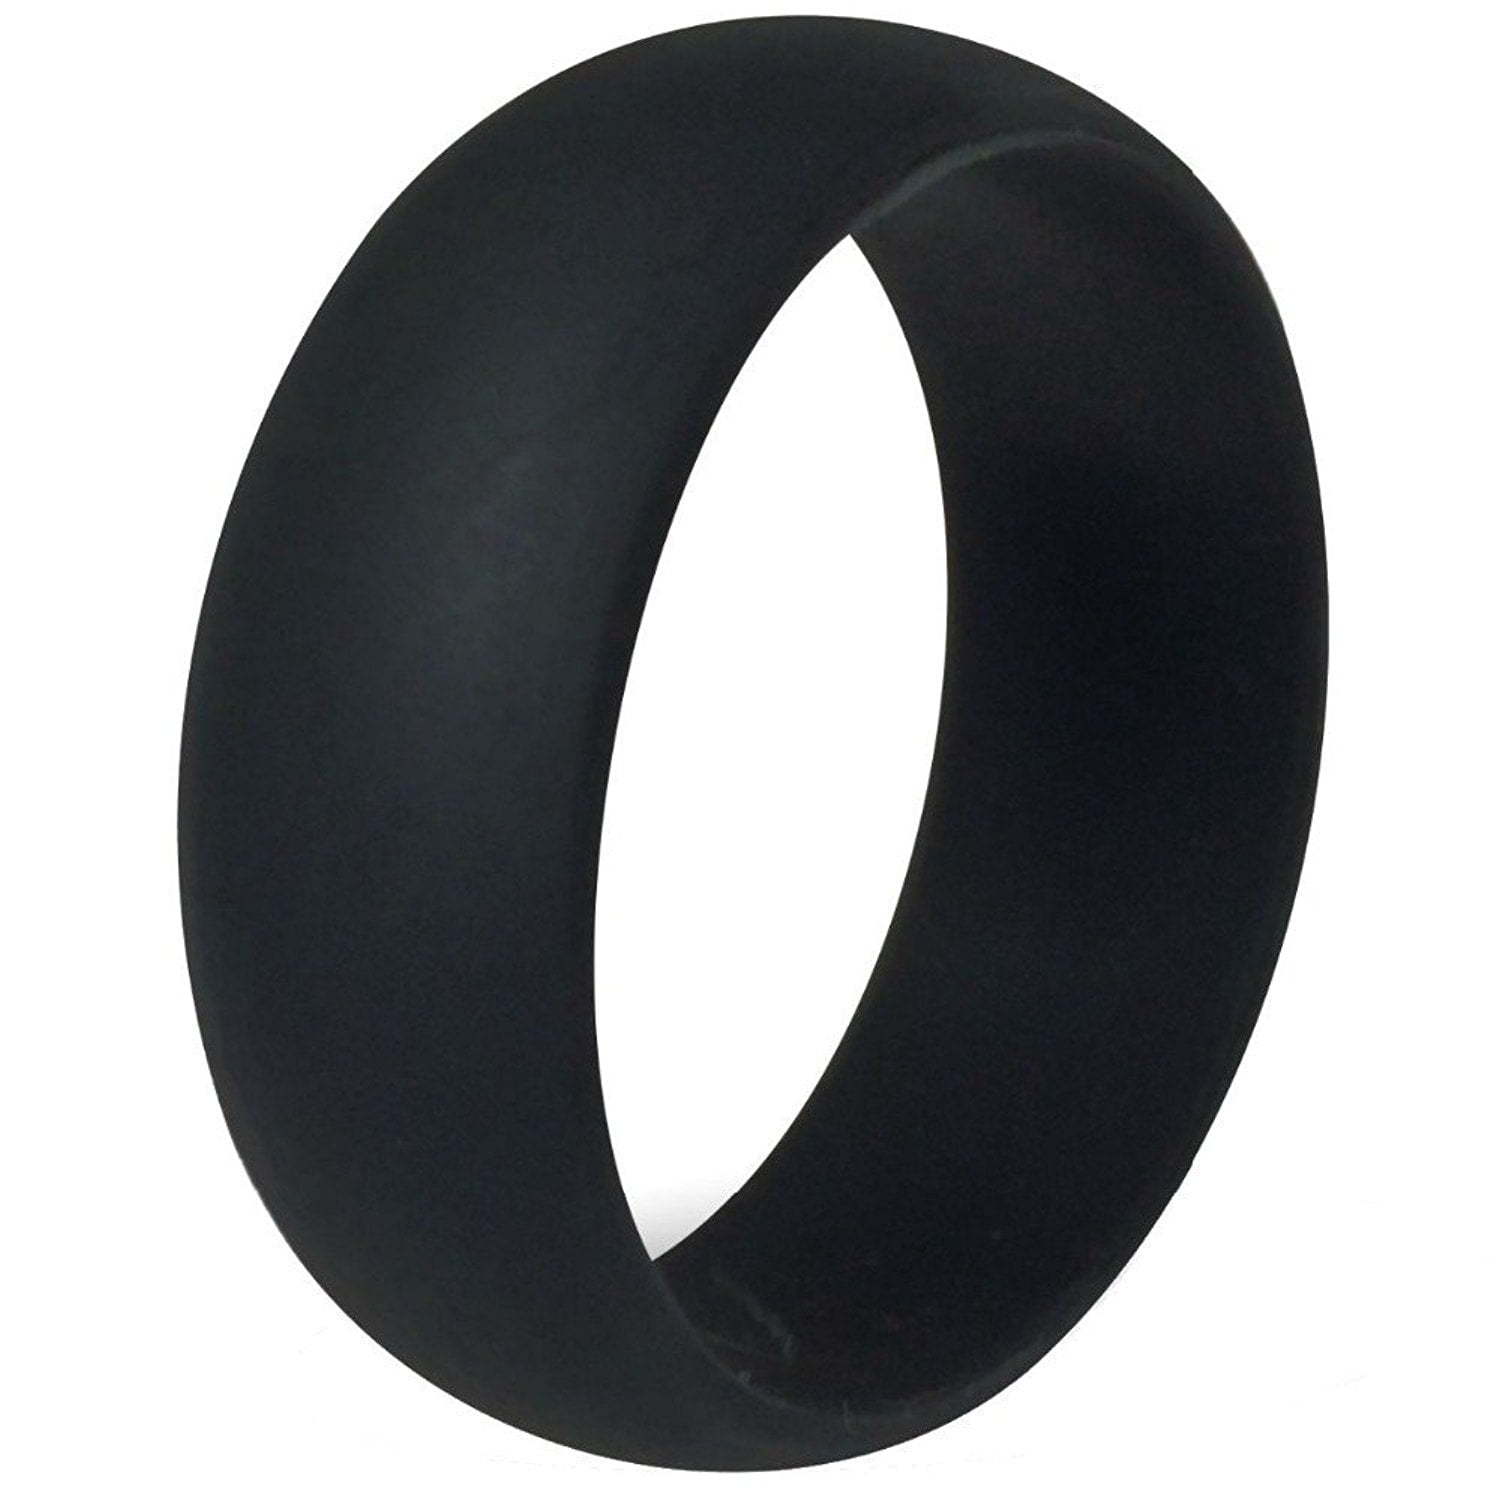 Silicone Wedding Ring for Men Women Gift Unisex Band 8mm Safest Flexible Durable Rubber Unmatched Quality Anti Allergic Comfortable Material 